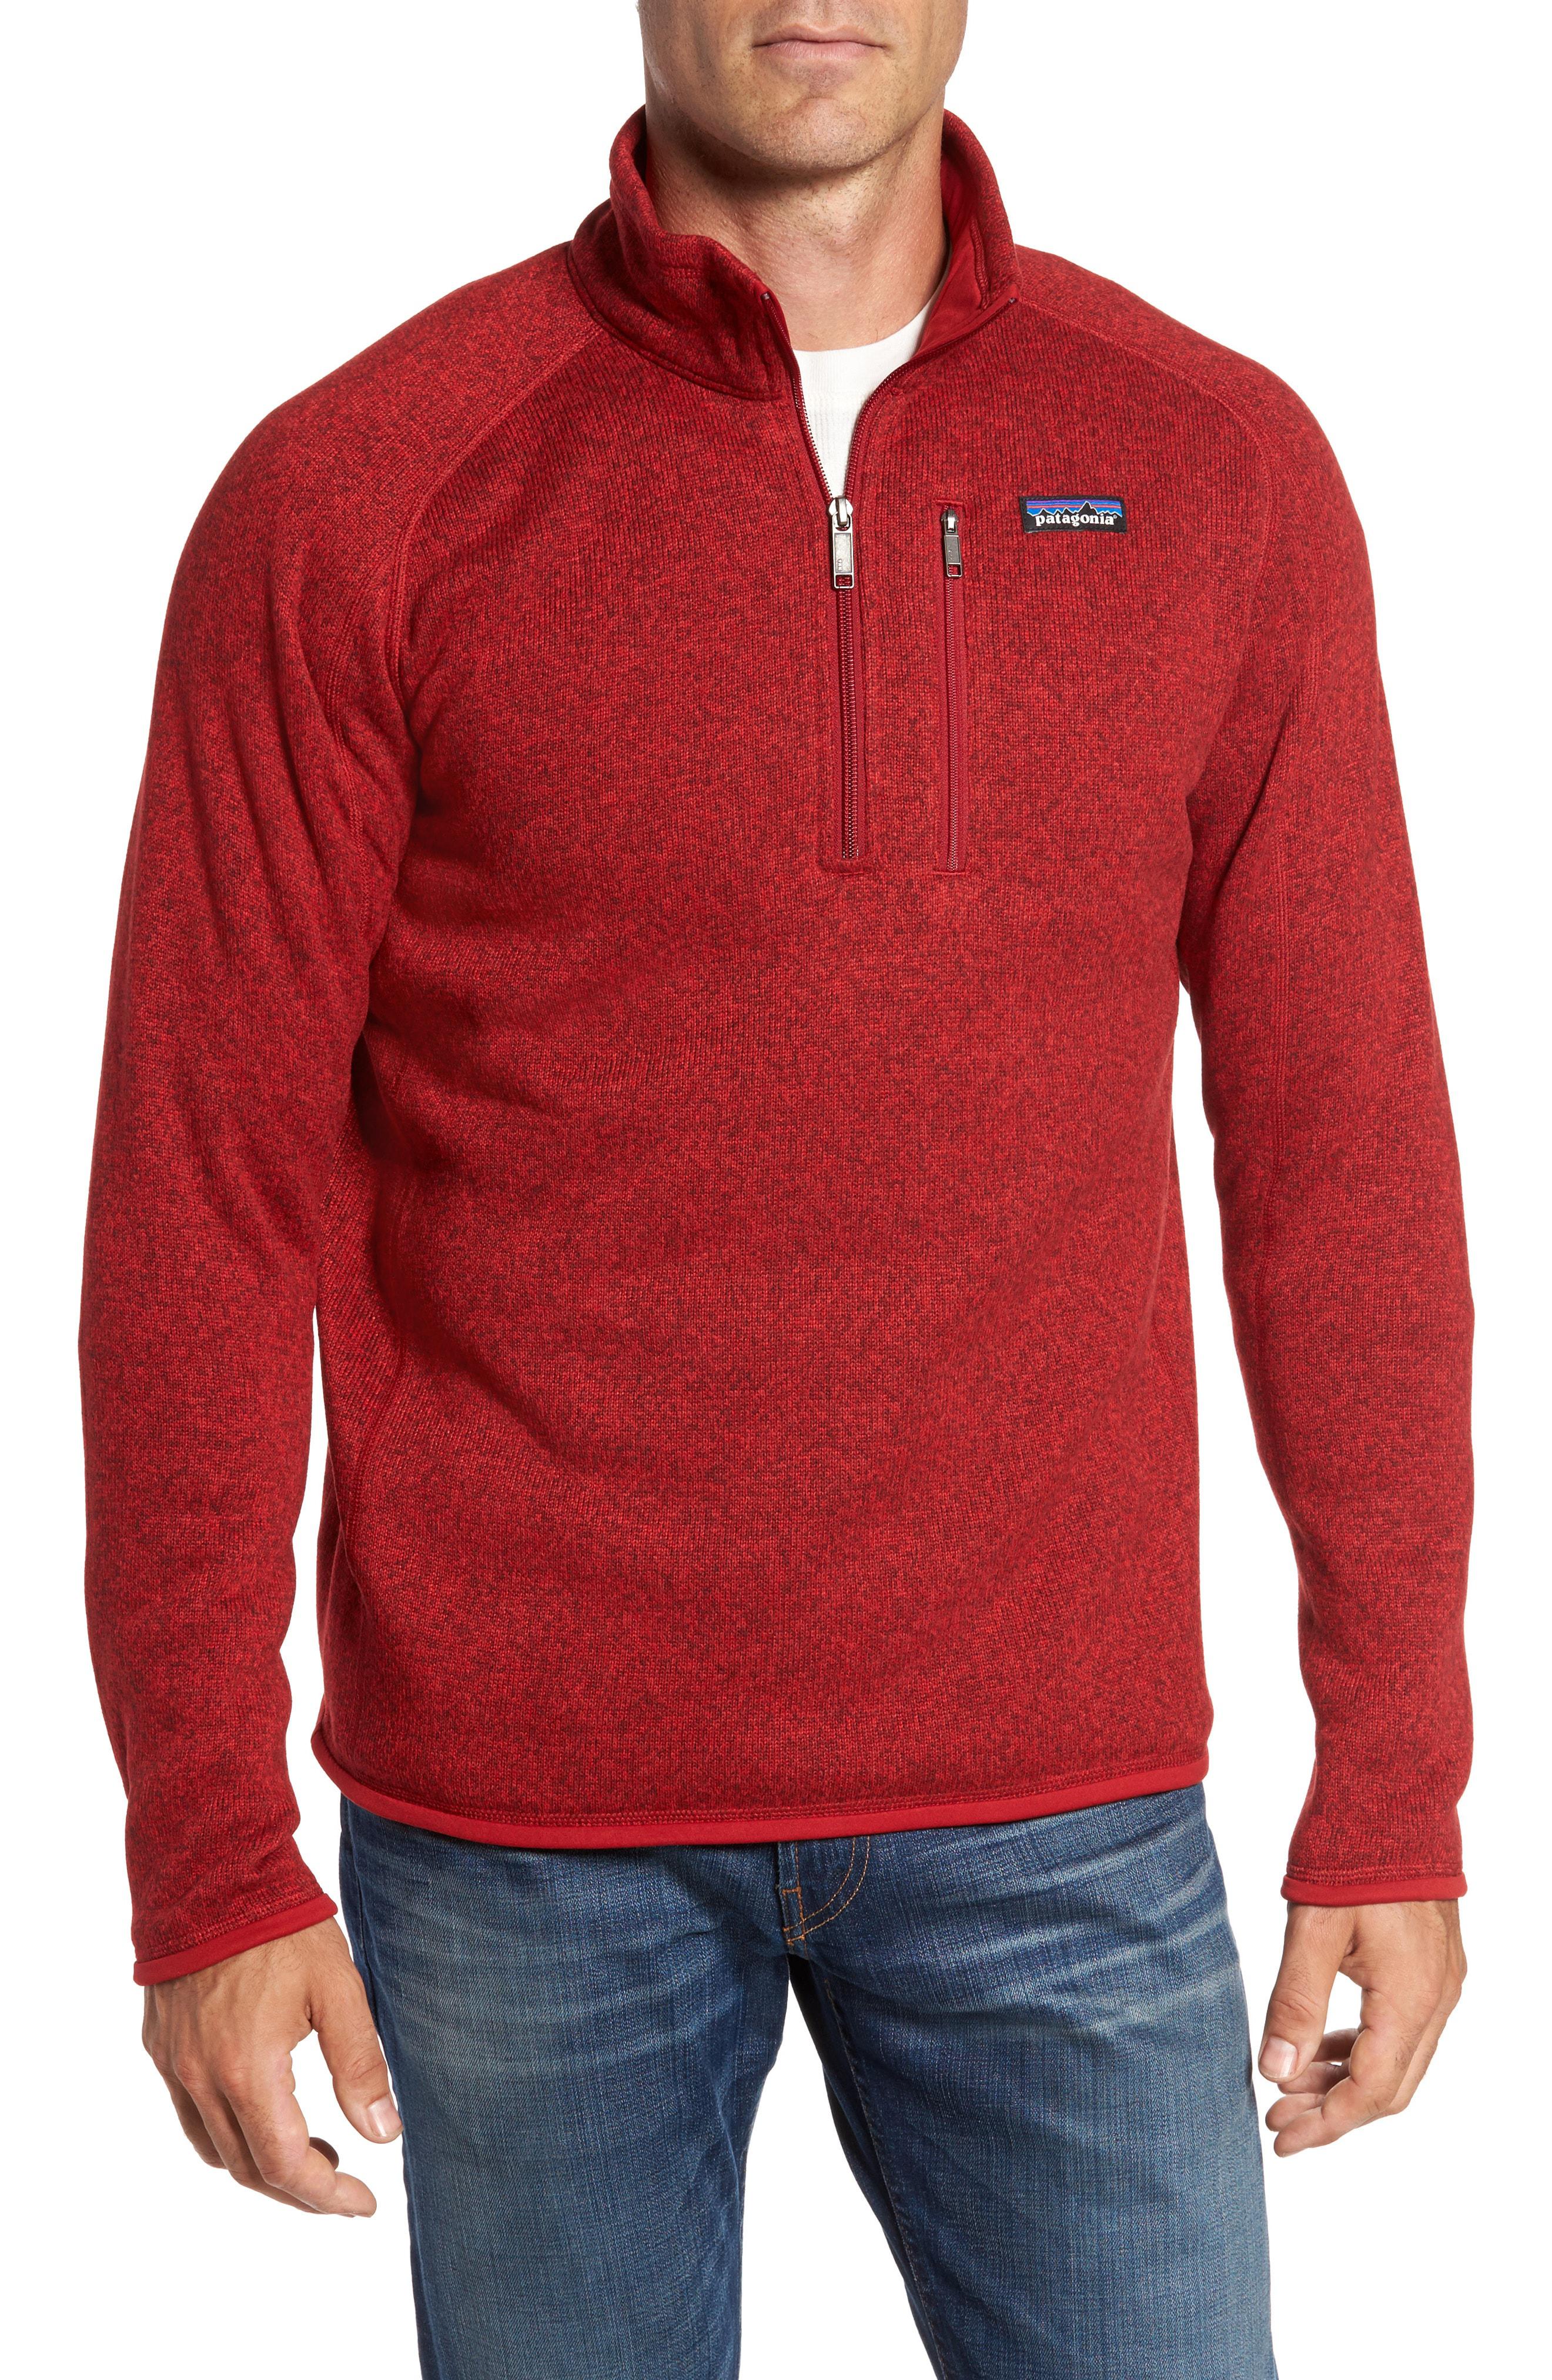 Patagonia Better Sweater Quarter Zip Pullover in Red for Men - Lyst